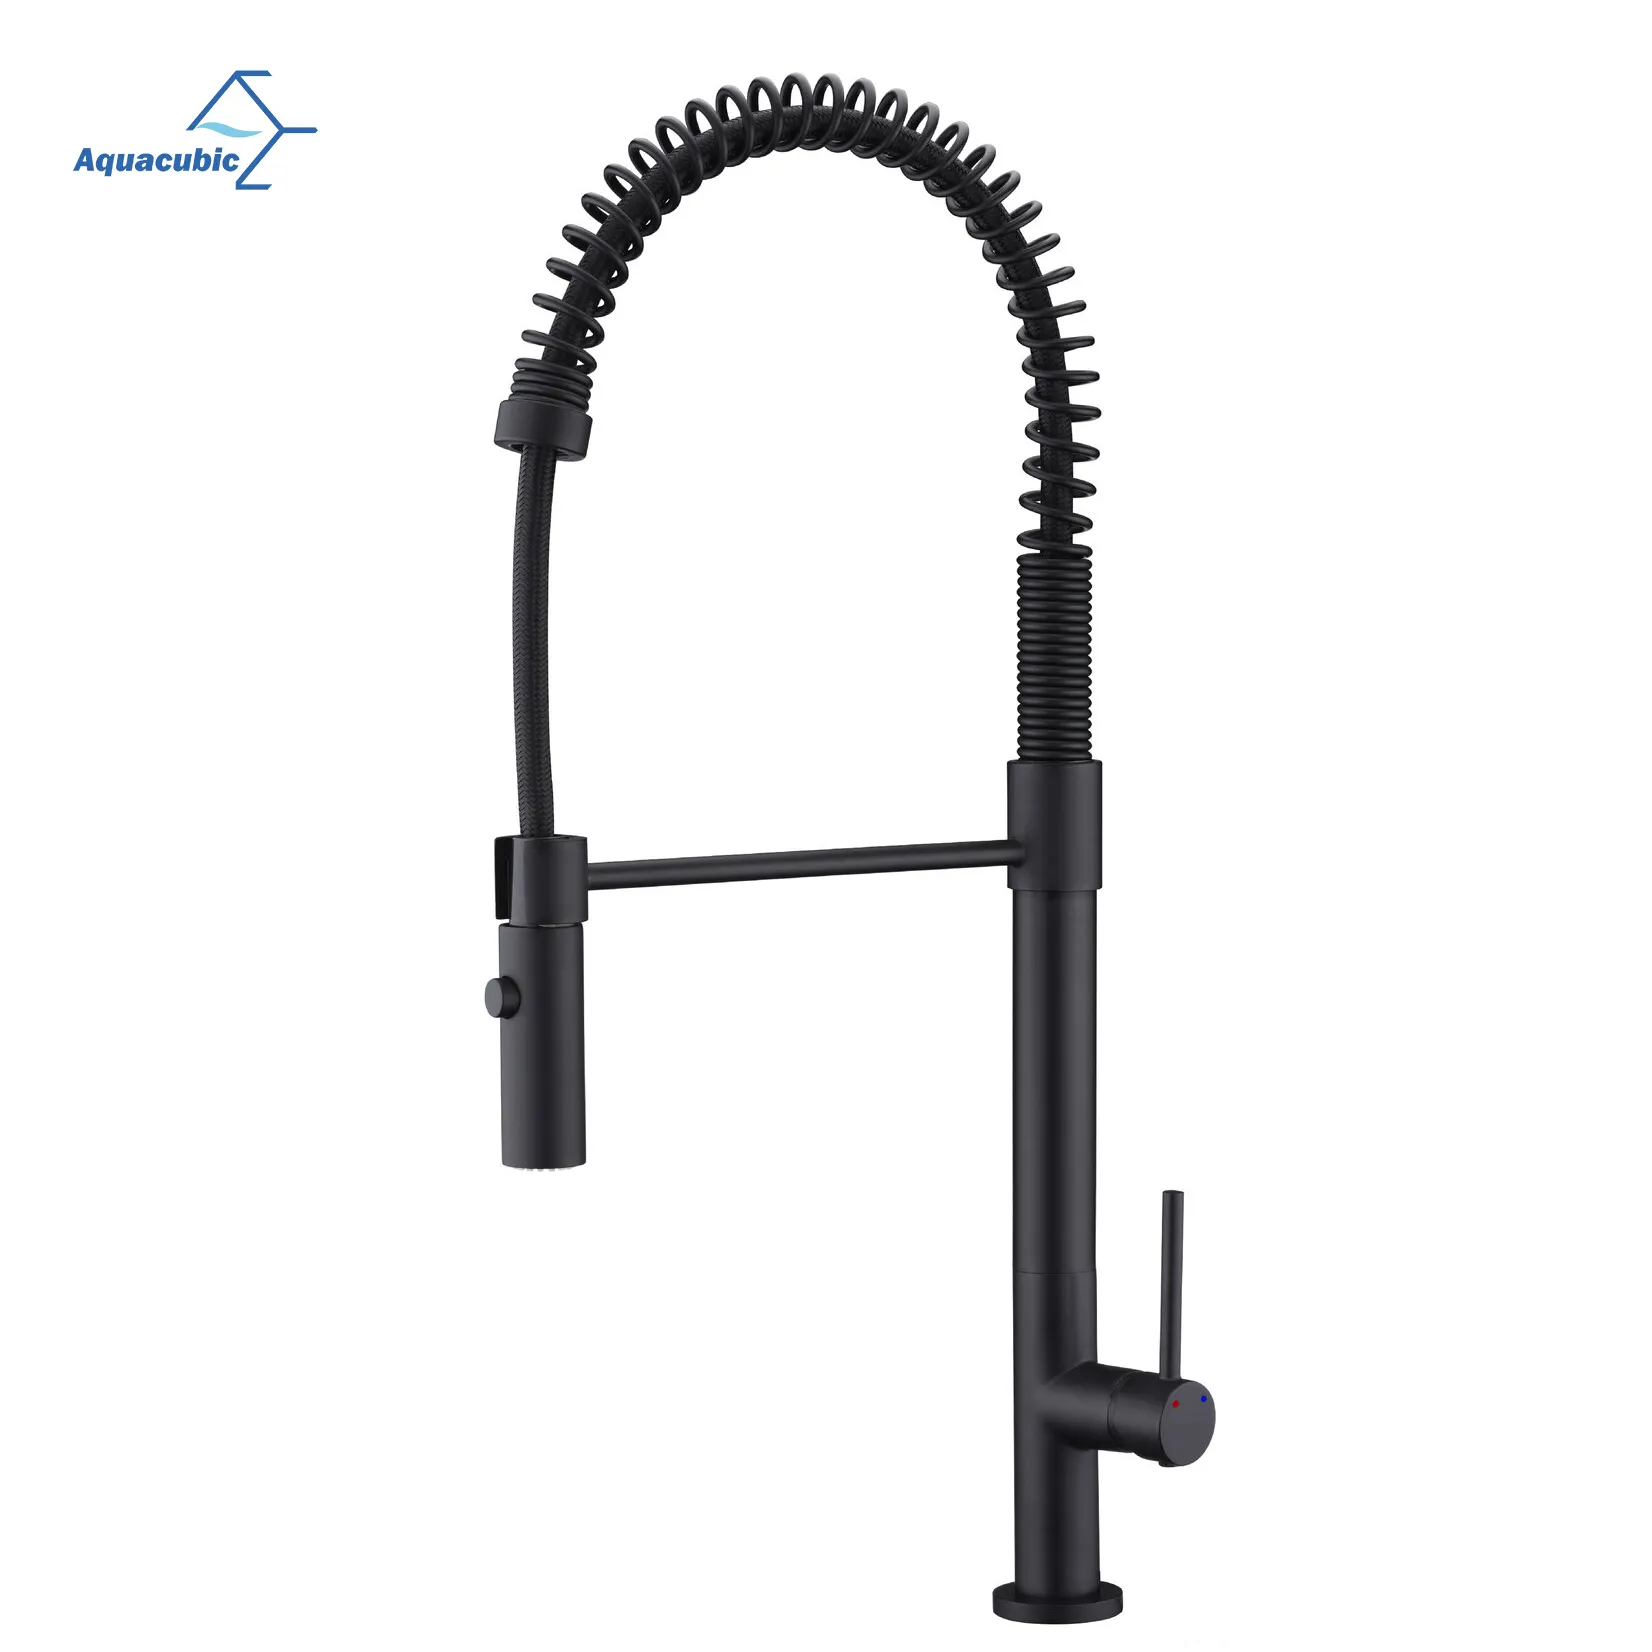 Aquacubic Matte Black Solid Brass Single Lever Pull Down Sprayer Spring Kitchen Sink Faucet for RV, Laundry, Bar